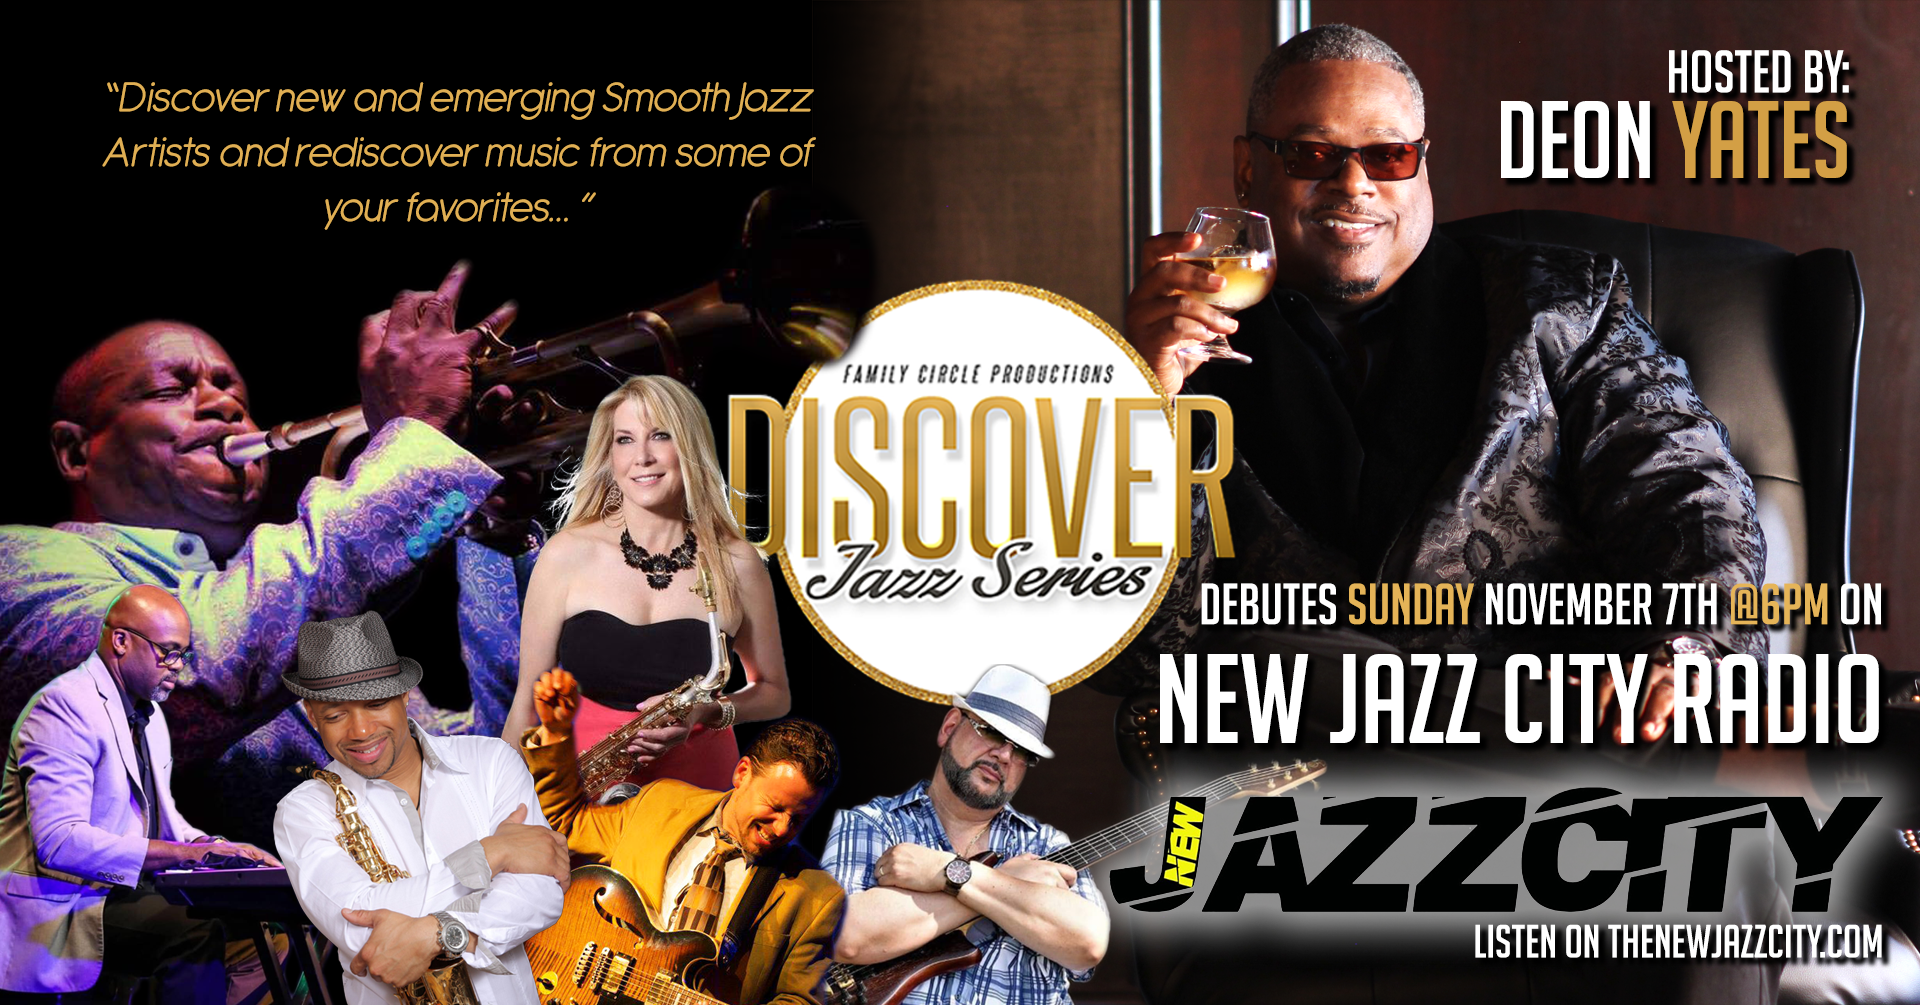 Discover Jazz Series